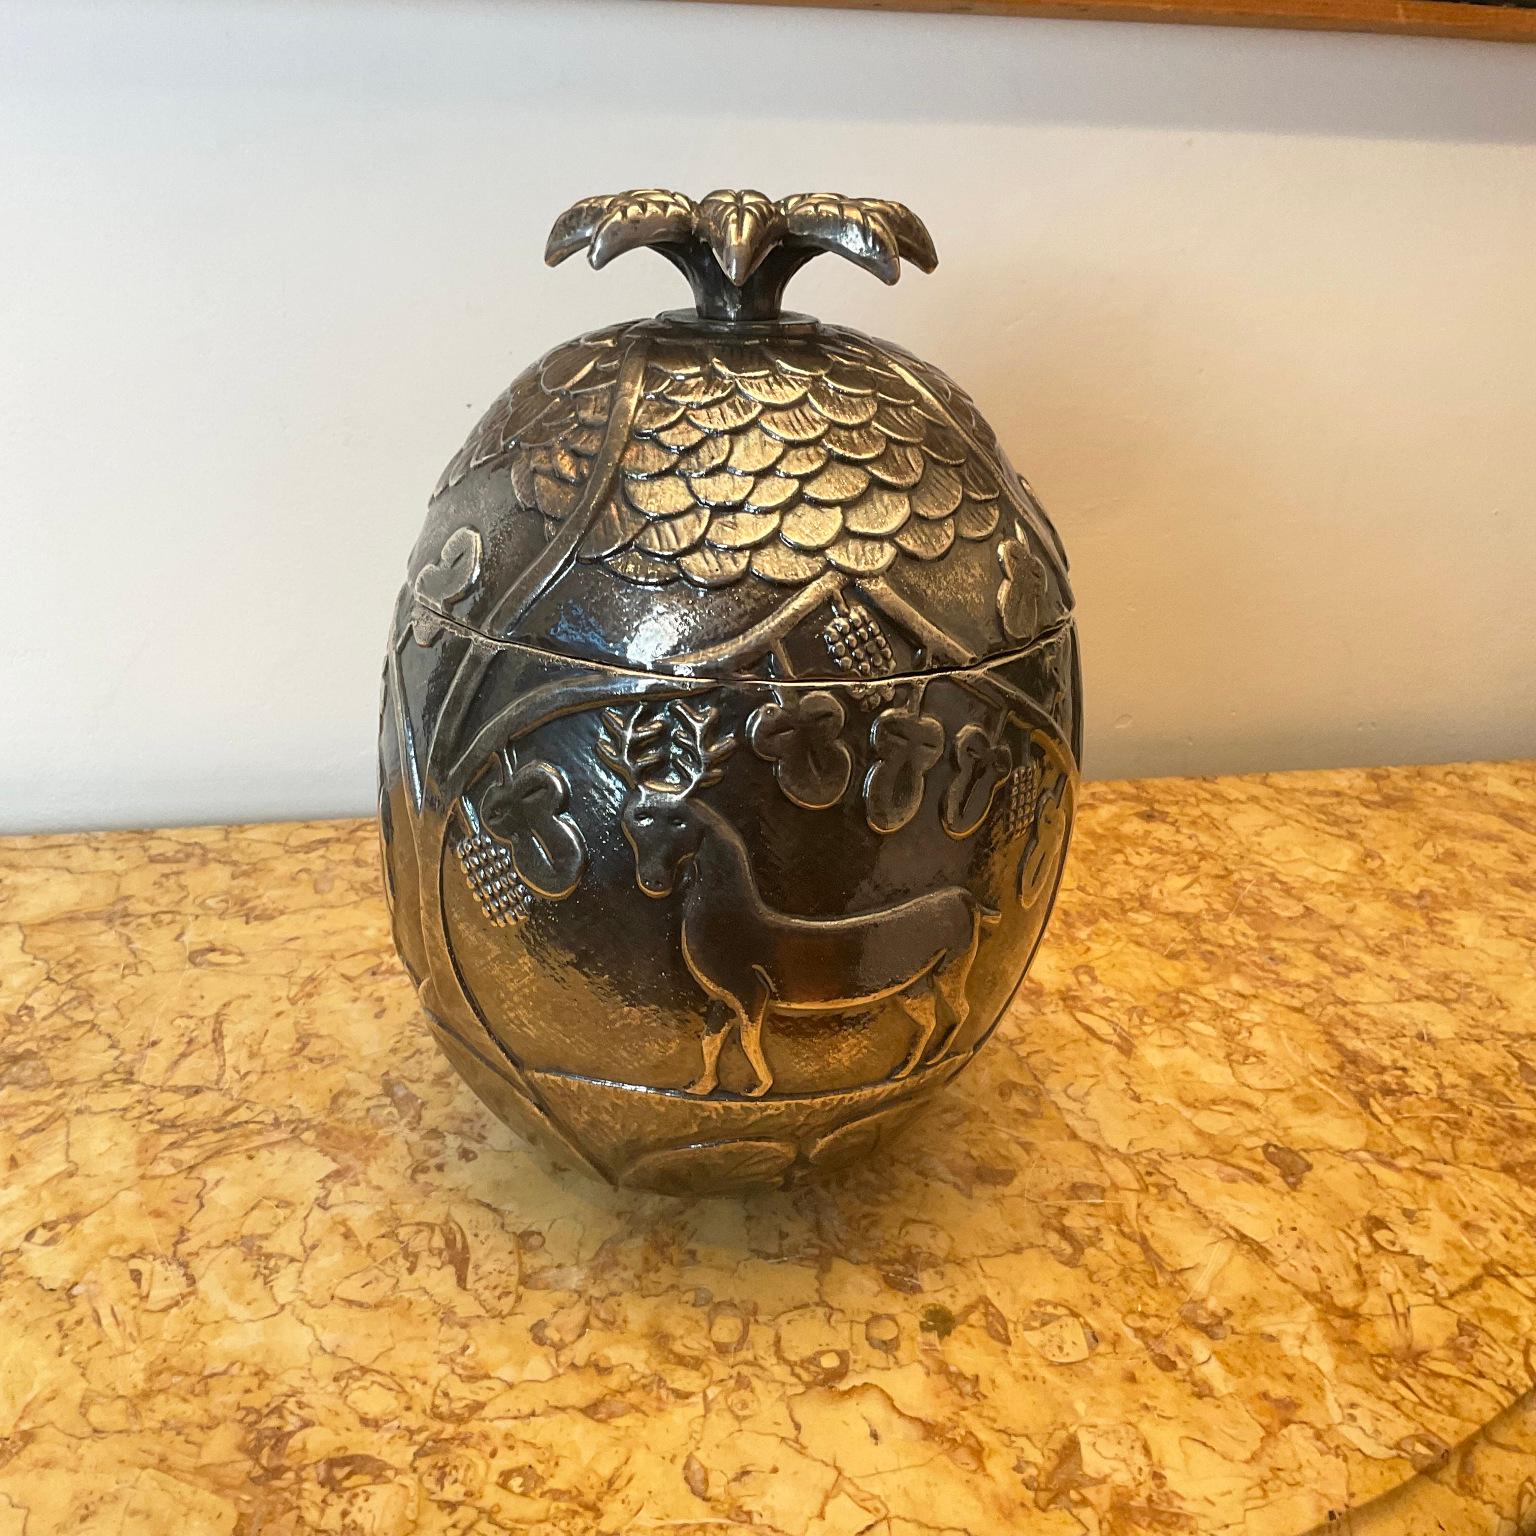 This pineapple-shaped ice bucket is decorated with embossed images of a camel, deer, and elephant surrounded by fruits, leaves, and branches, on its top lid is a lion's head
This decor is reminiscent of Naïve Art paintings such as the work of the